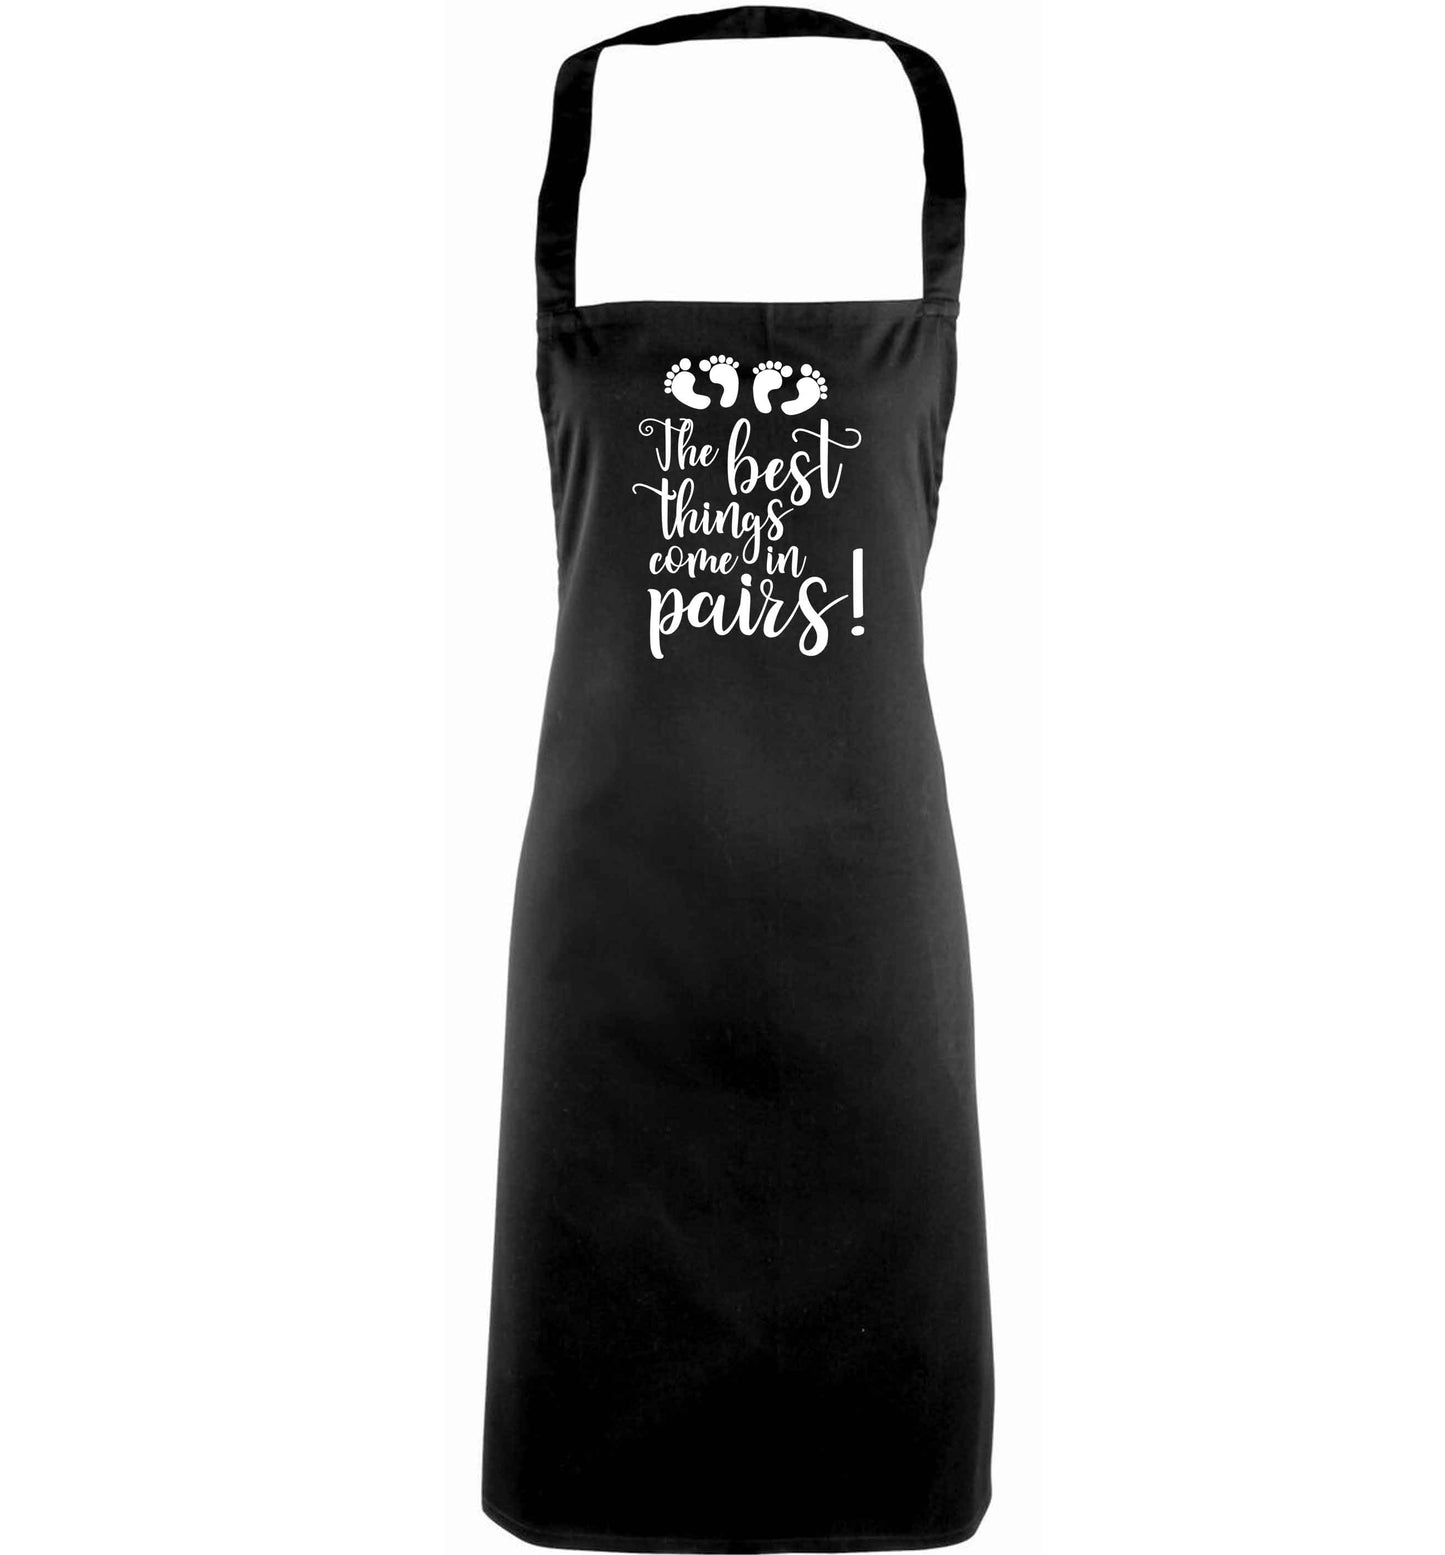 The best things come in pairs! adults black apron